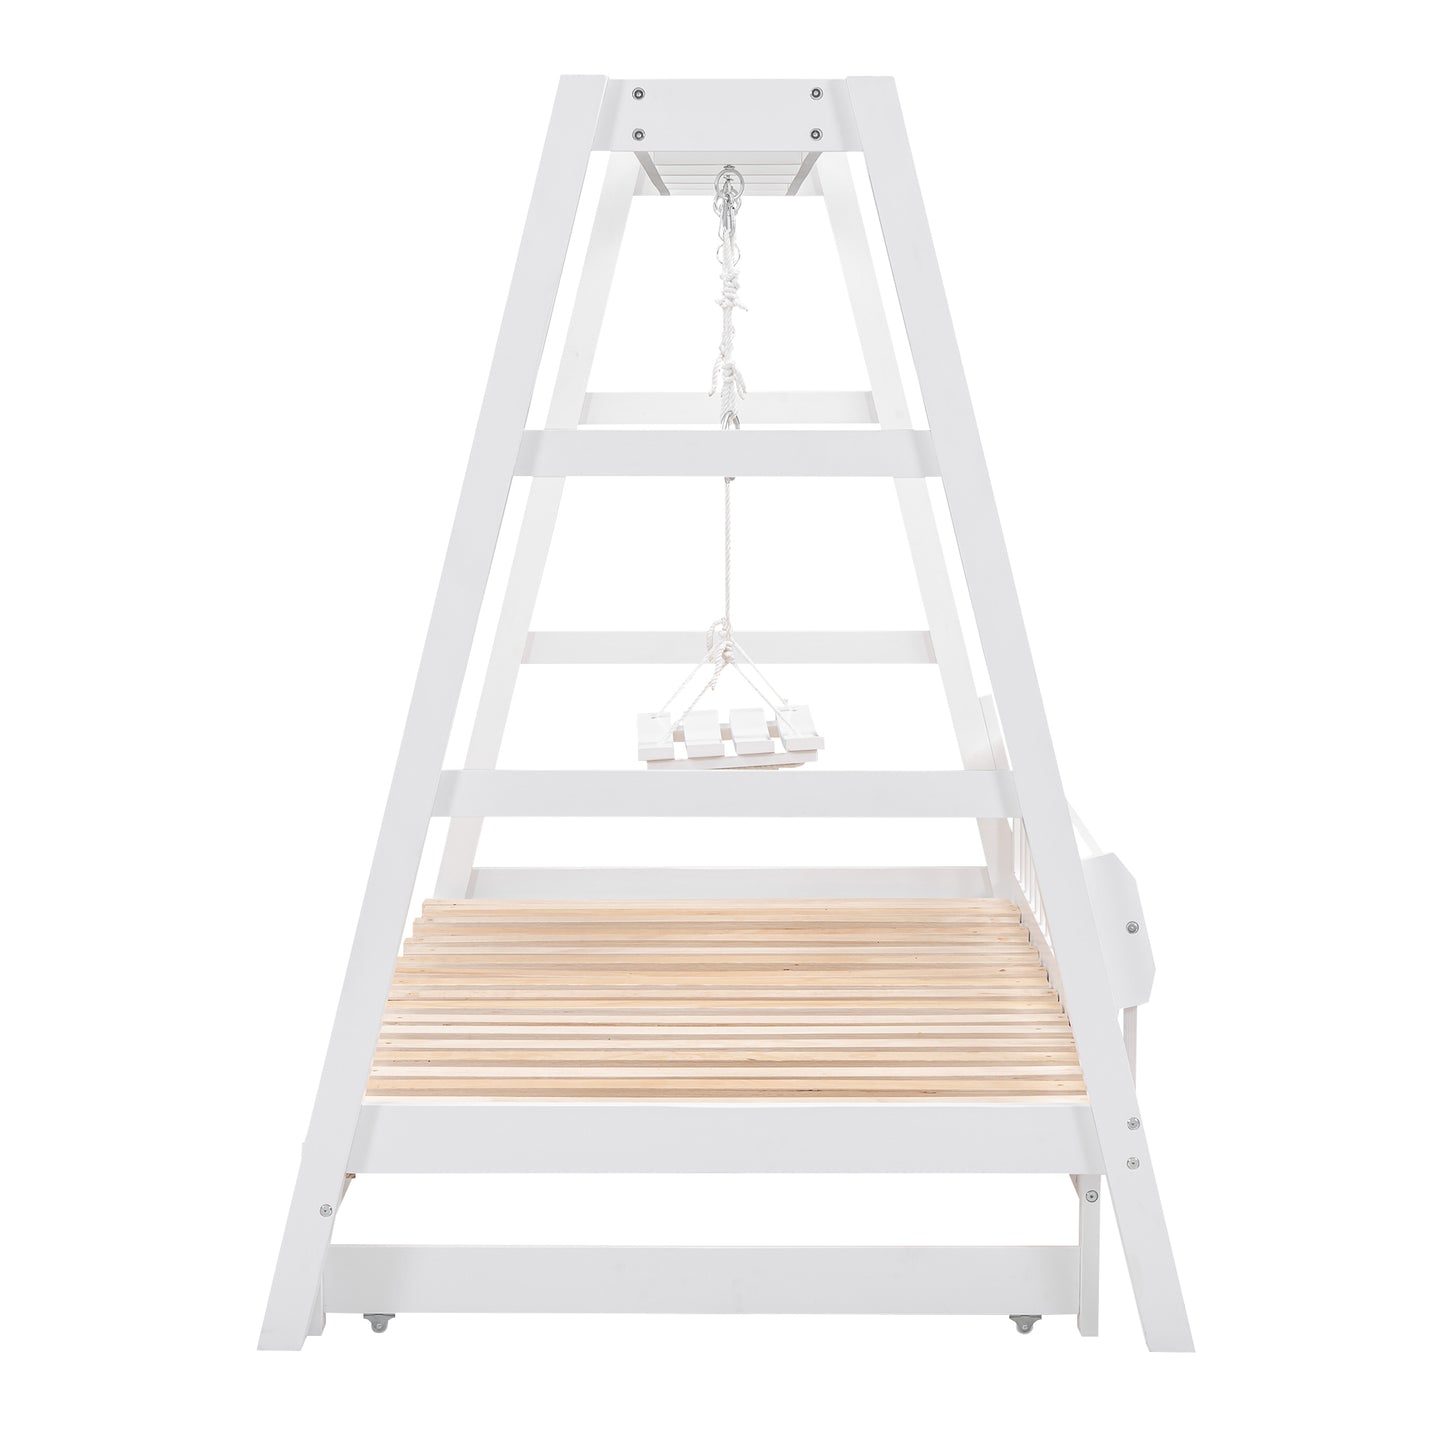 Extendable Twin Daybed with Swing and Ring Handles, White(Twin bed can be pulled out to be King)